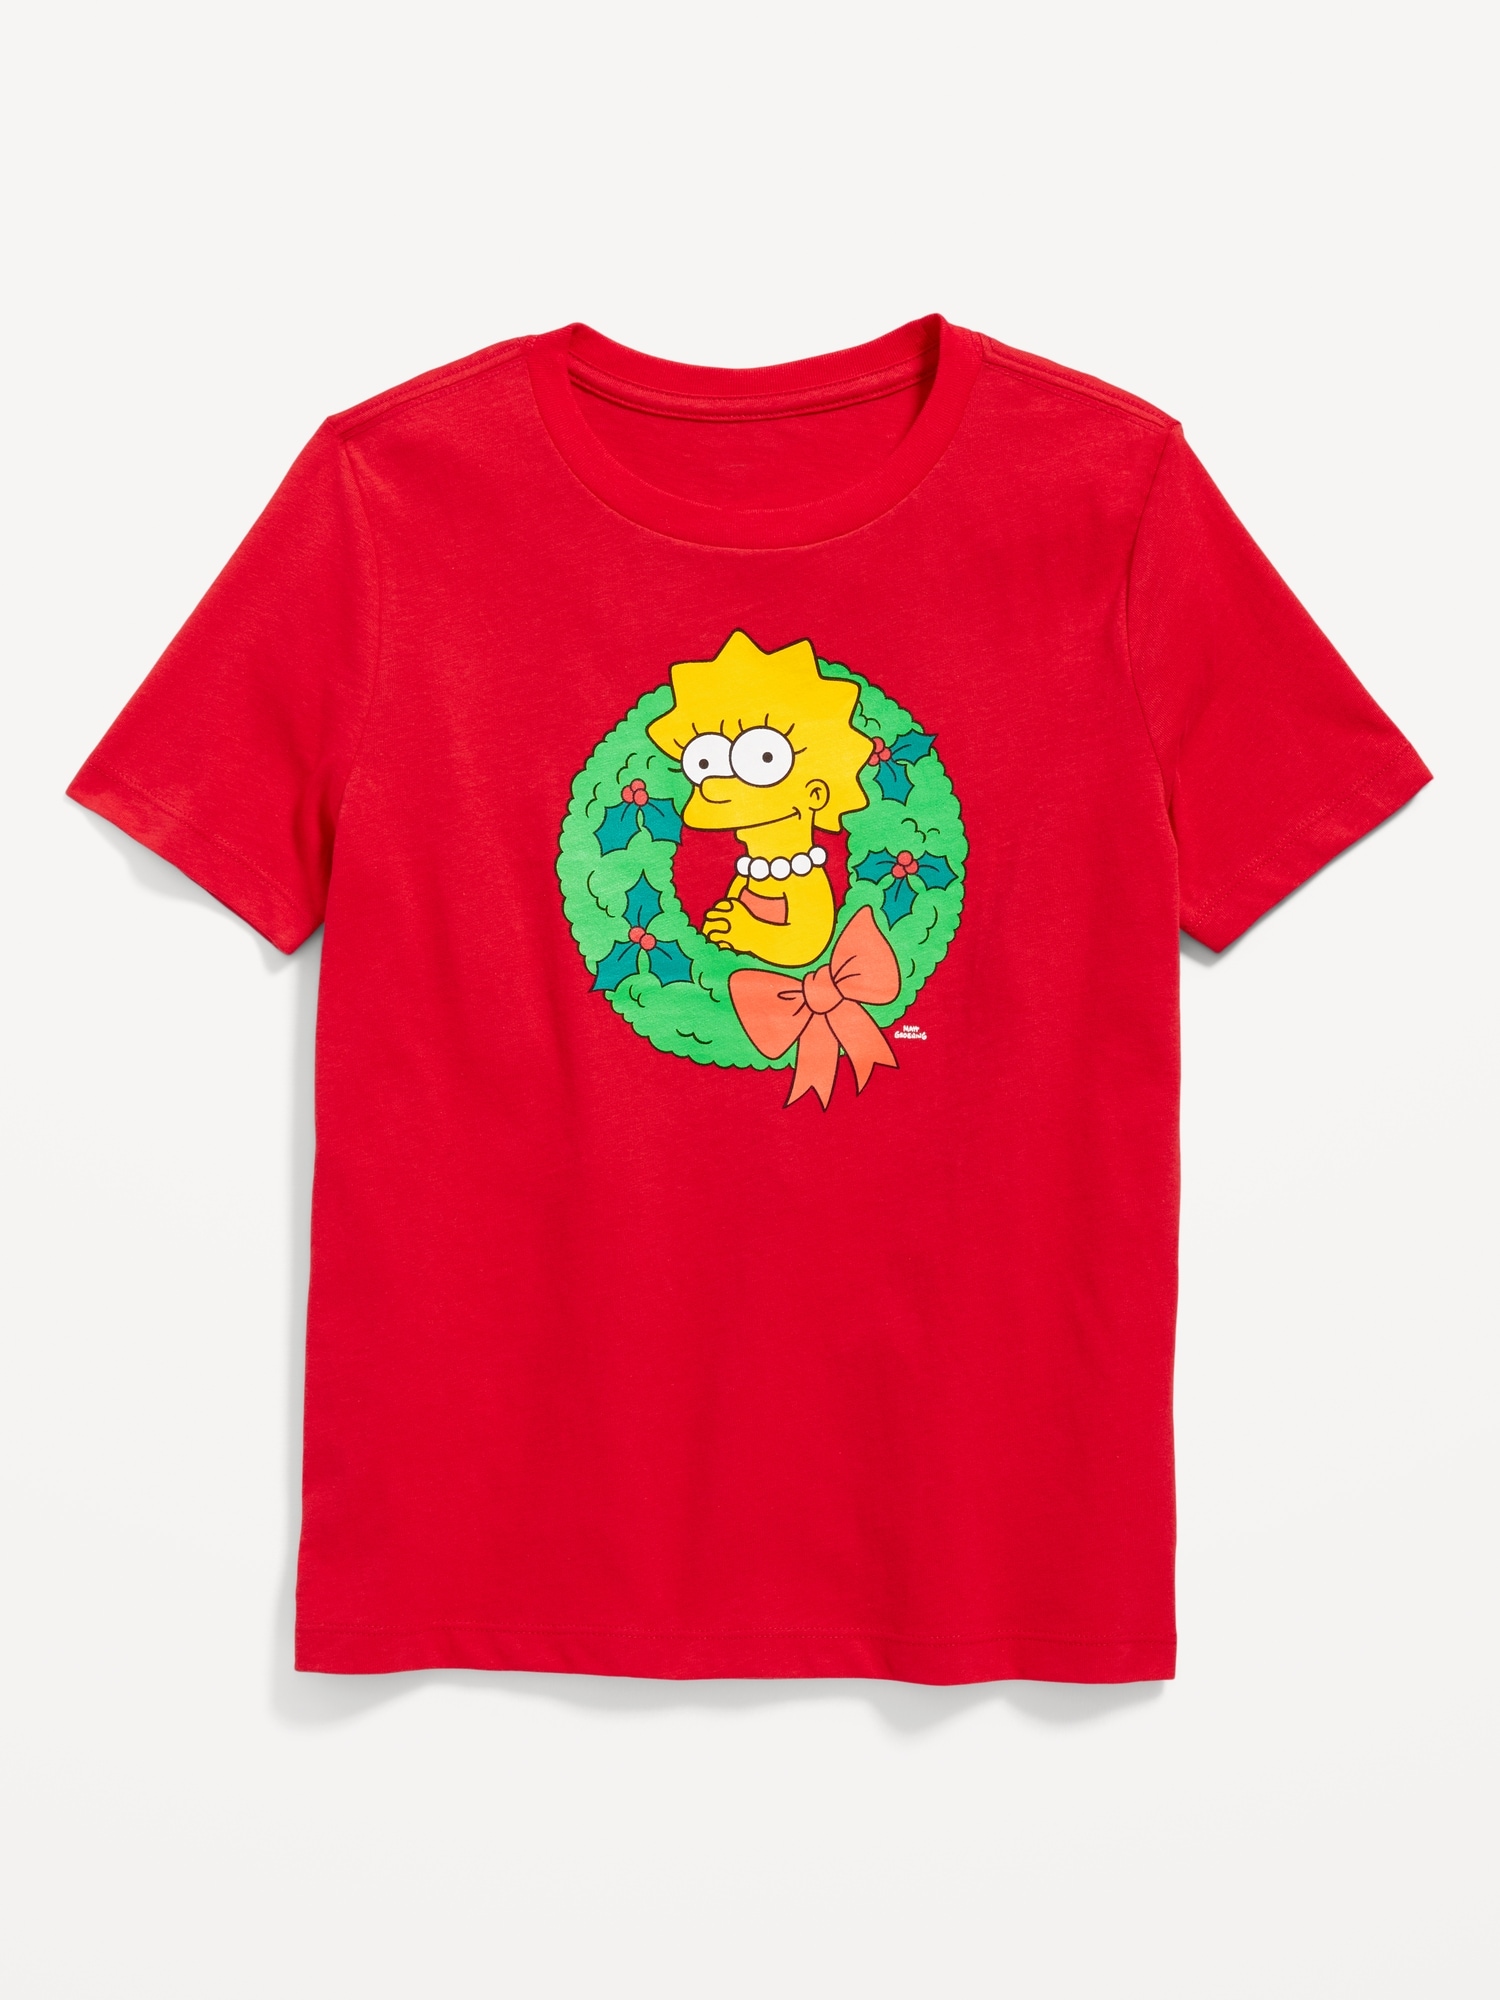 The Simpsons™ Christmas Matching Gender-Neutral T-Shirt for Kids | Old Navy